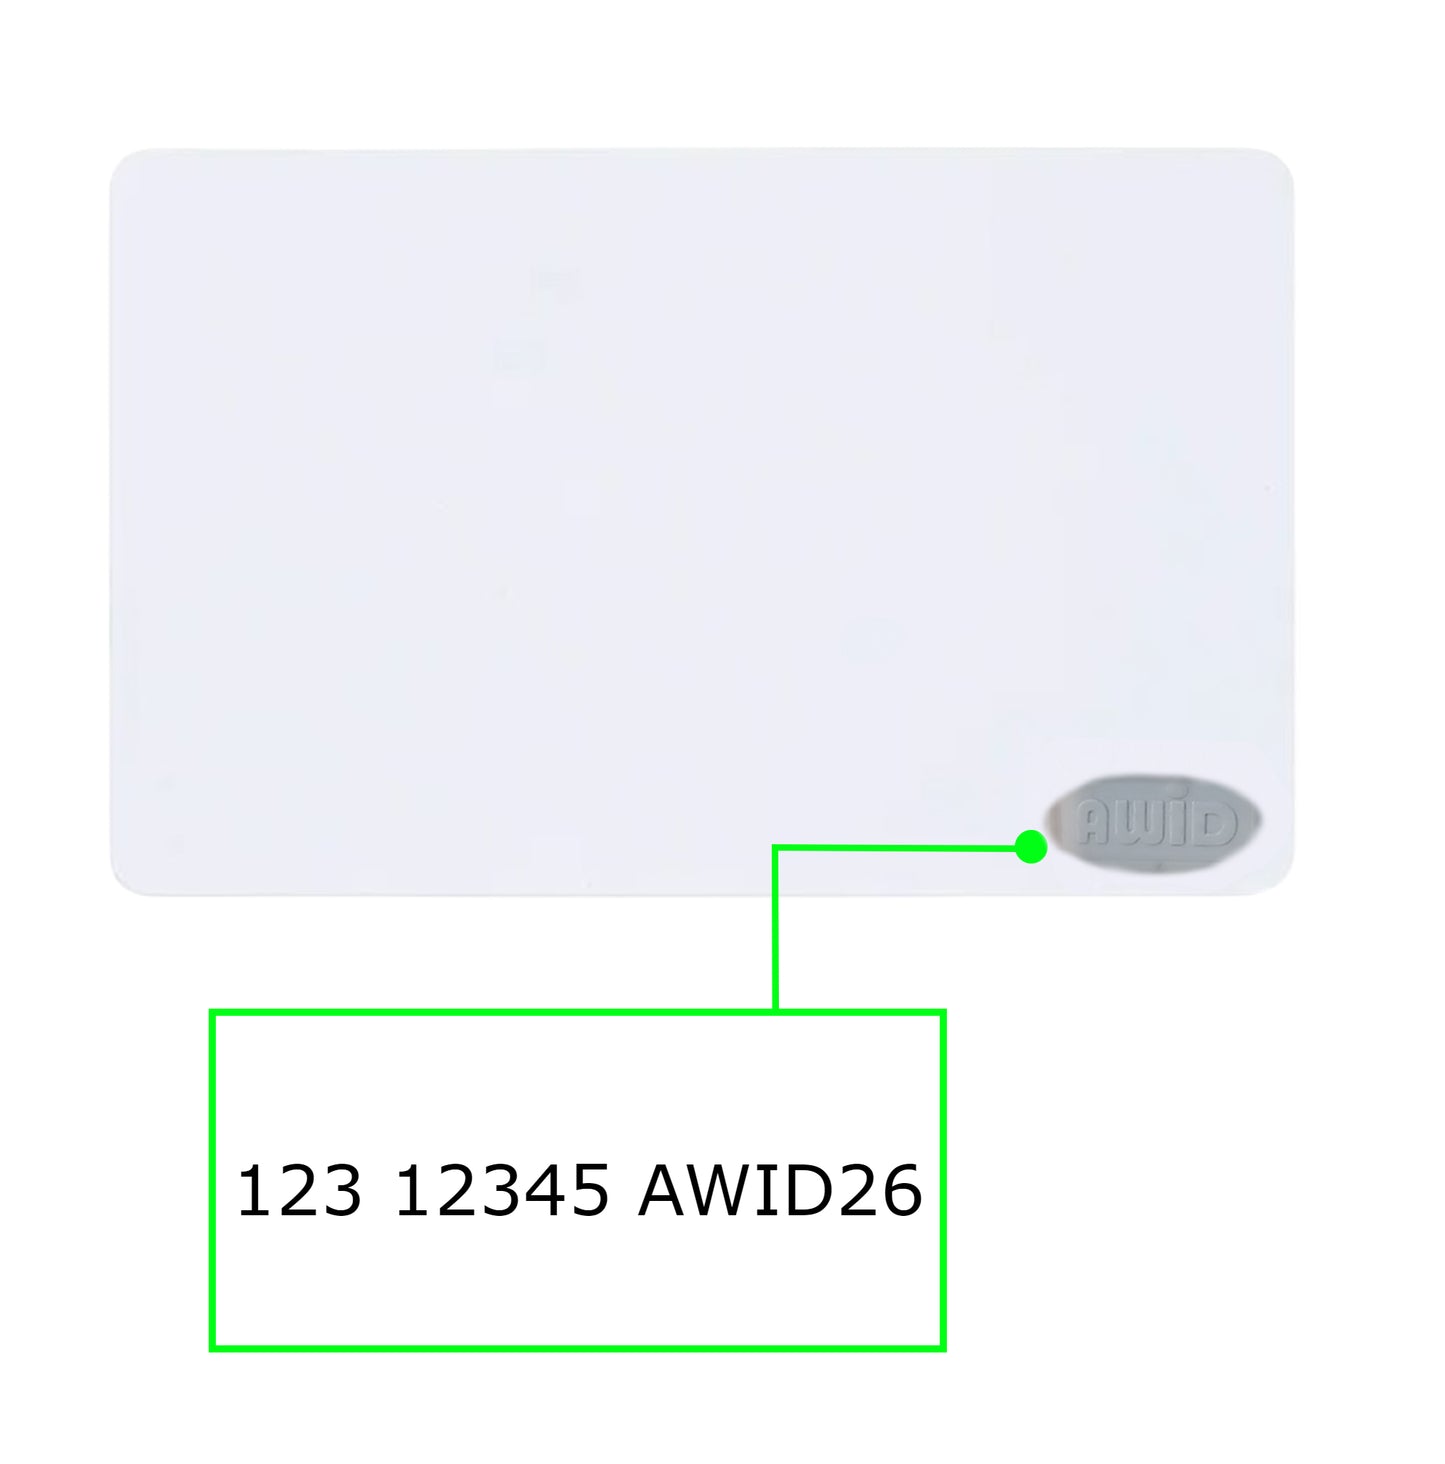 awid key card access control awid card card access serial number copy by serial number no mail in awid system clamshell awid 26 bit awid 34 bit office card key card fob copy apartment fob condo key card